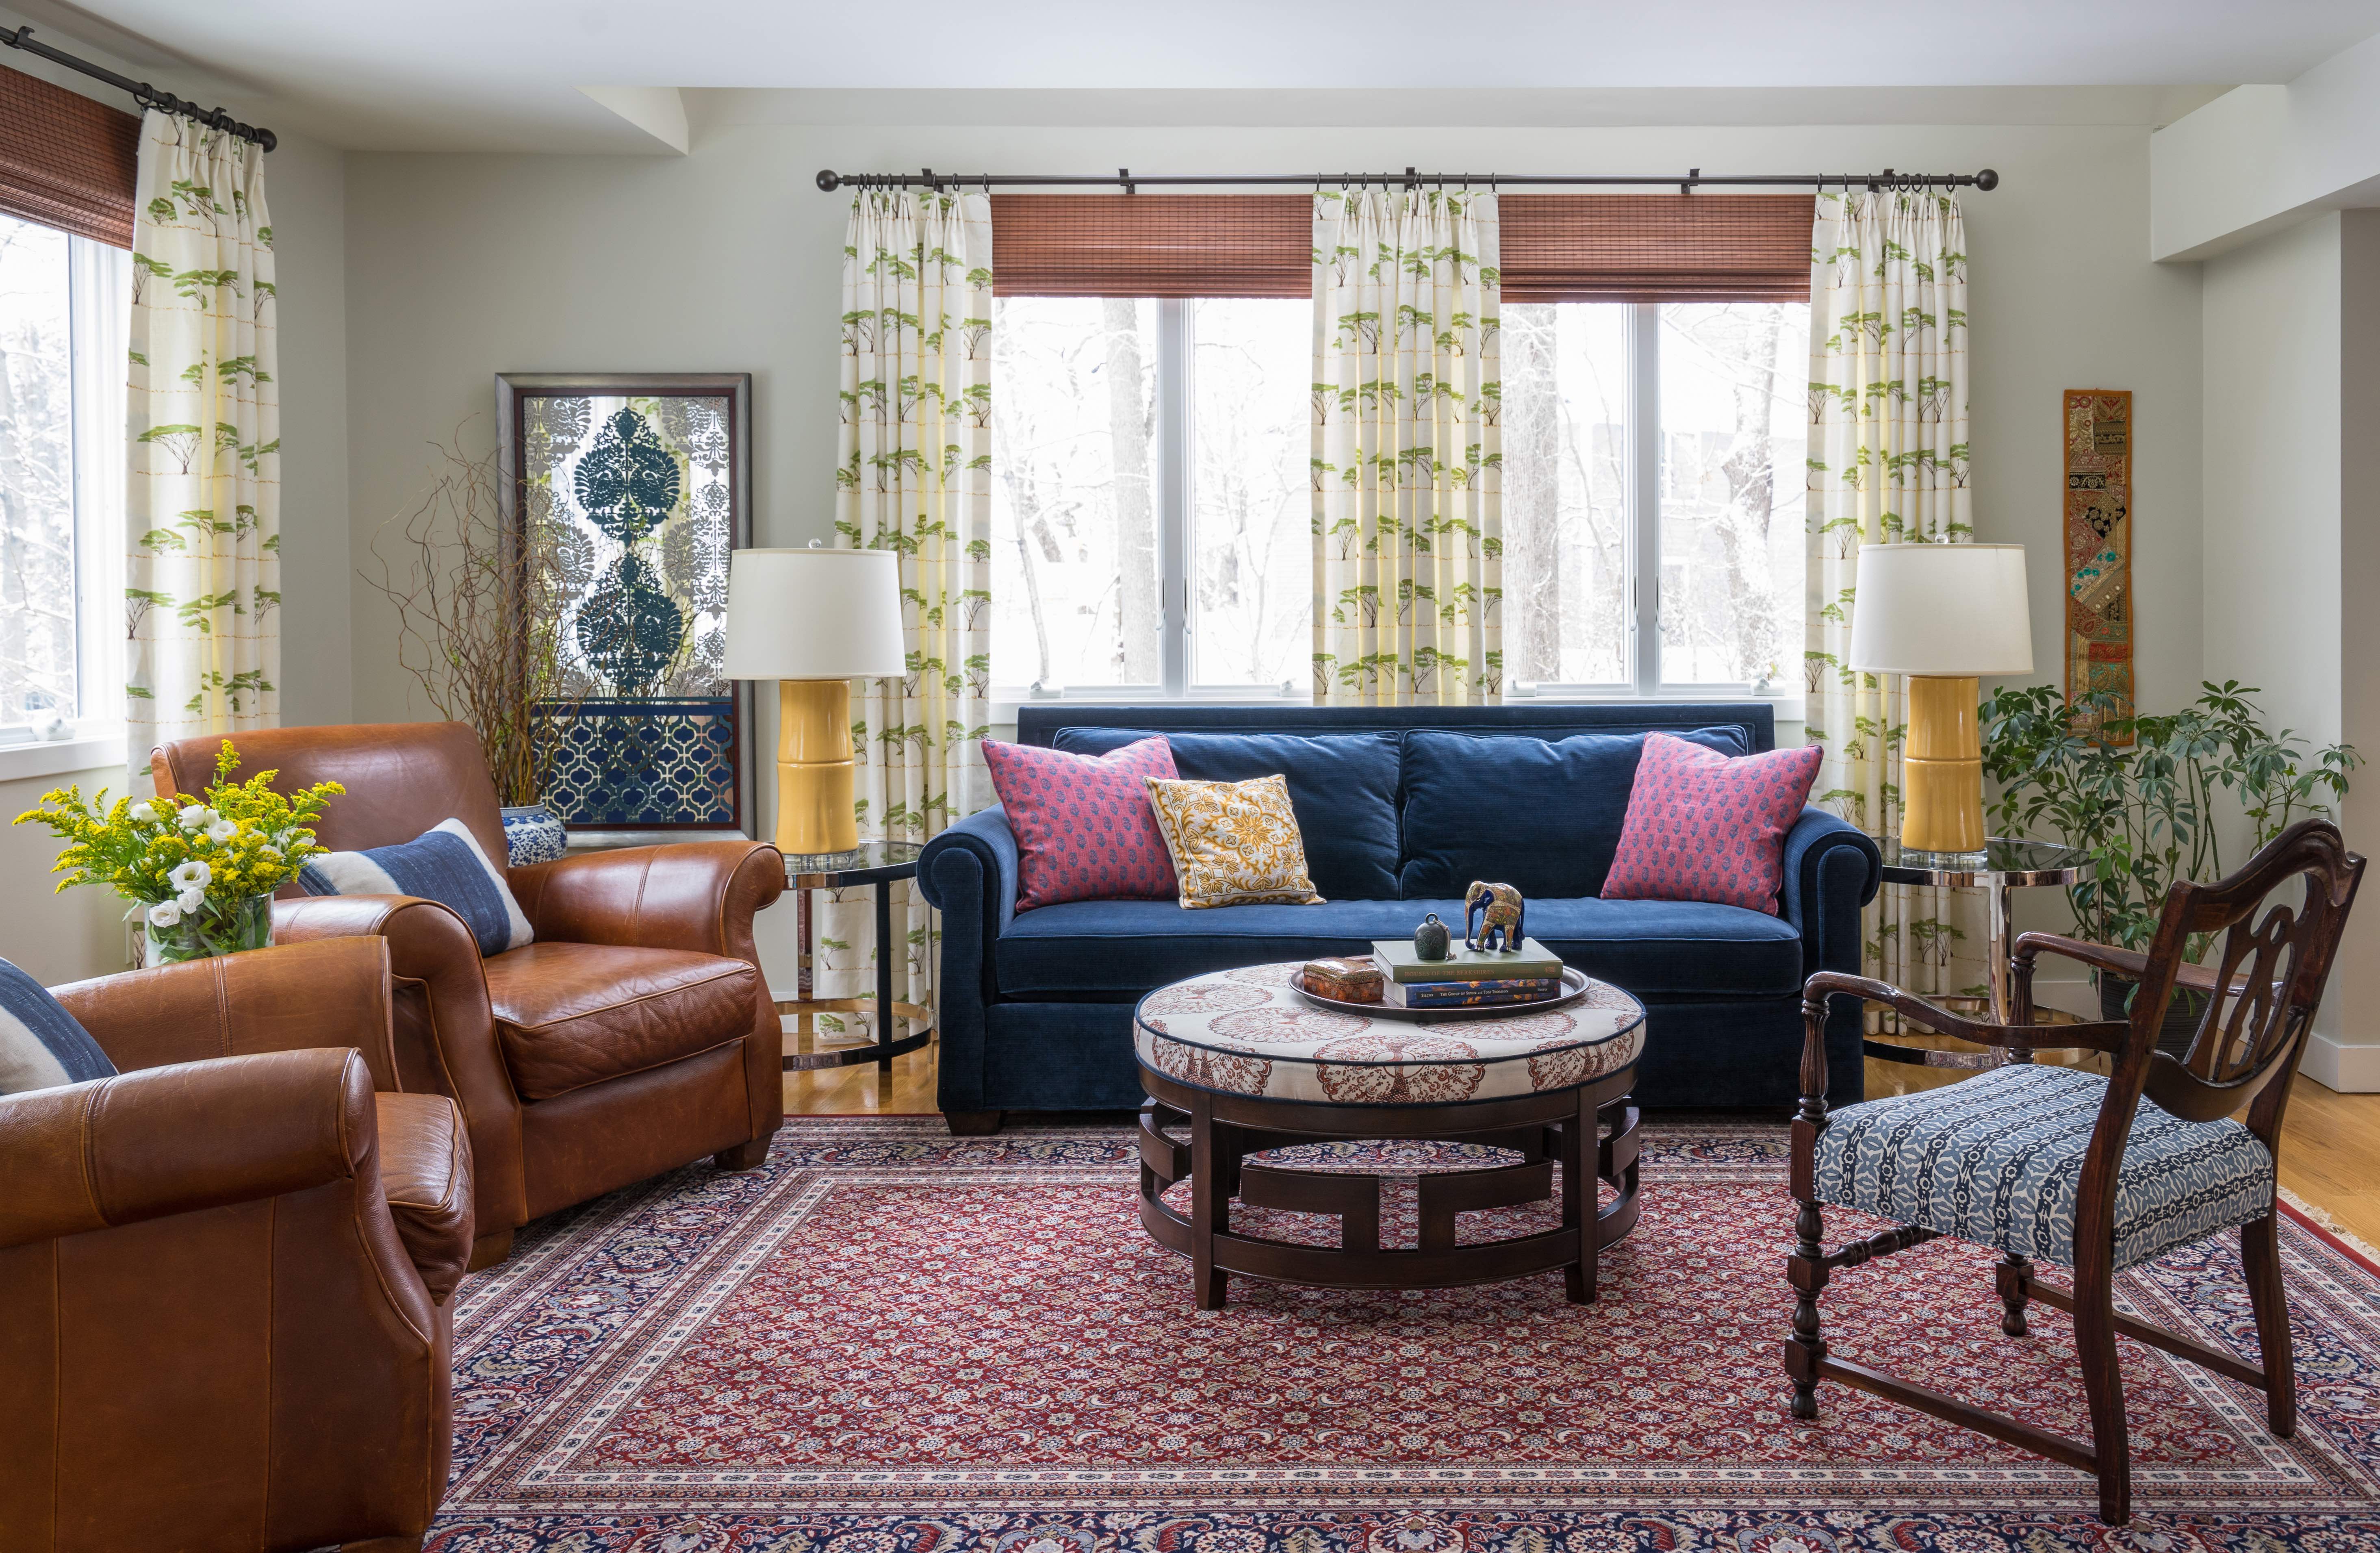 Room Reveal: A Colorful Living Room Reboot with Global Influences | Kelly Rogers Interiors | Interiors for Families